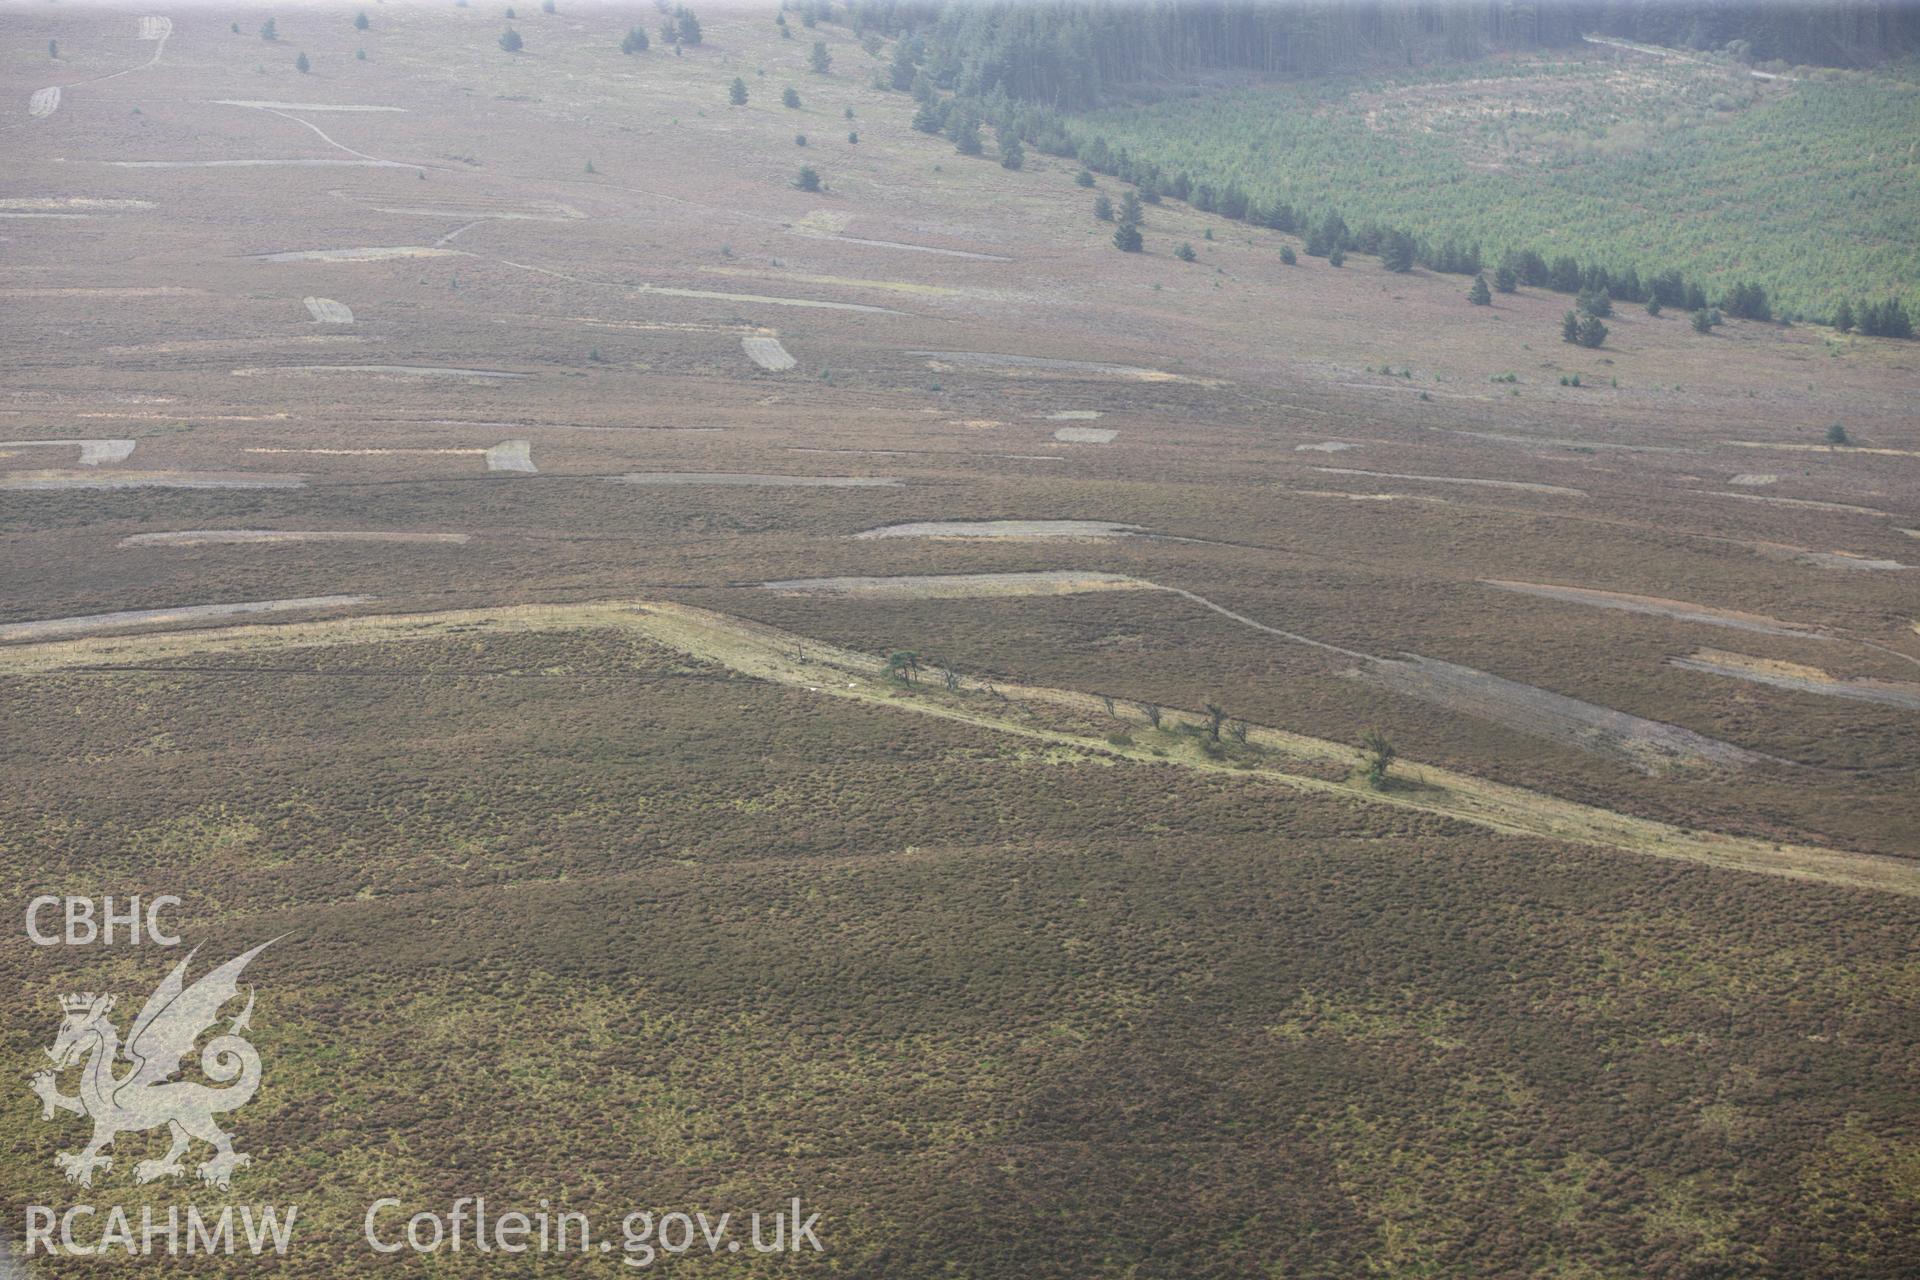 RCAHMW colour oblique photograph of Vivod Mountain Cairn. Taken by Toby Driver on 04/10/2011.